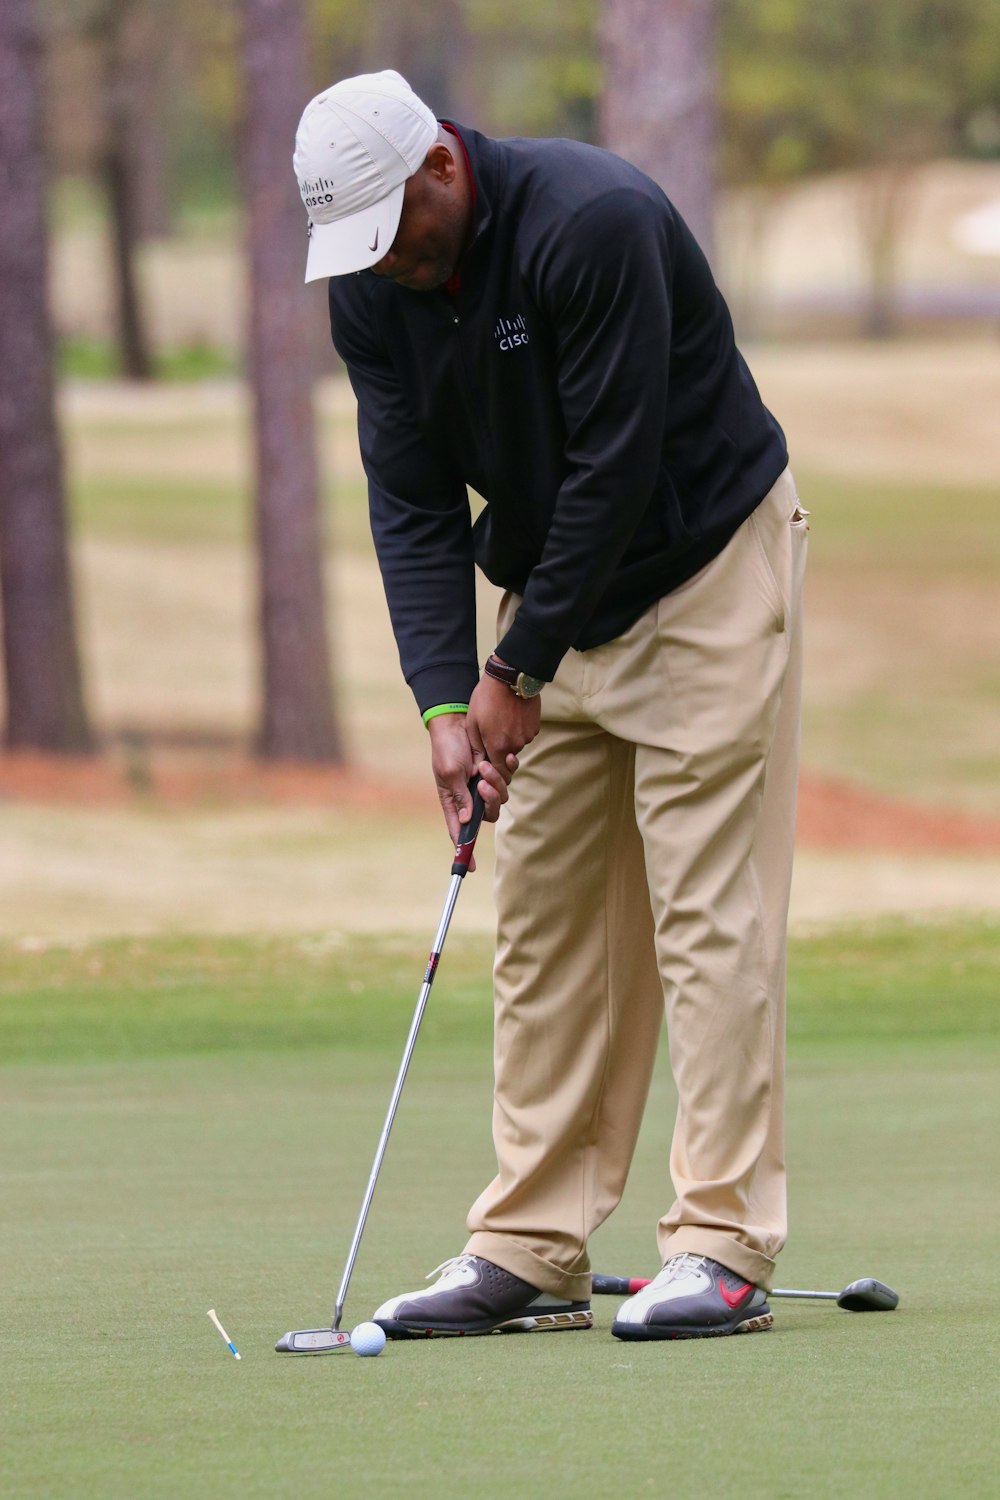 man in black jacket and beige pants playing golf during daytime